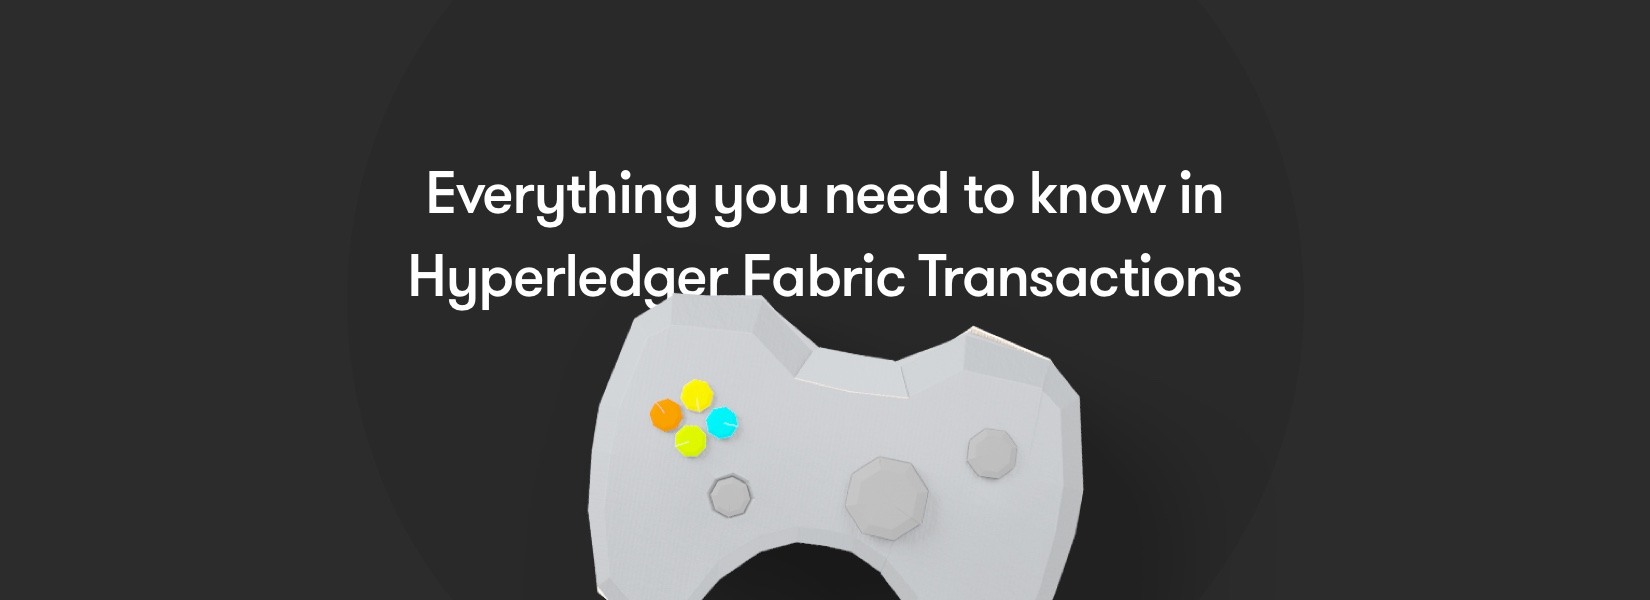 Hyperledger Fabric Transactions. What is it? And how does it happen?